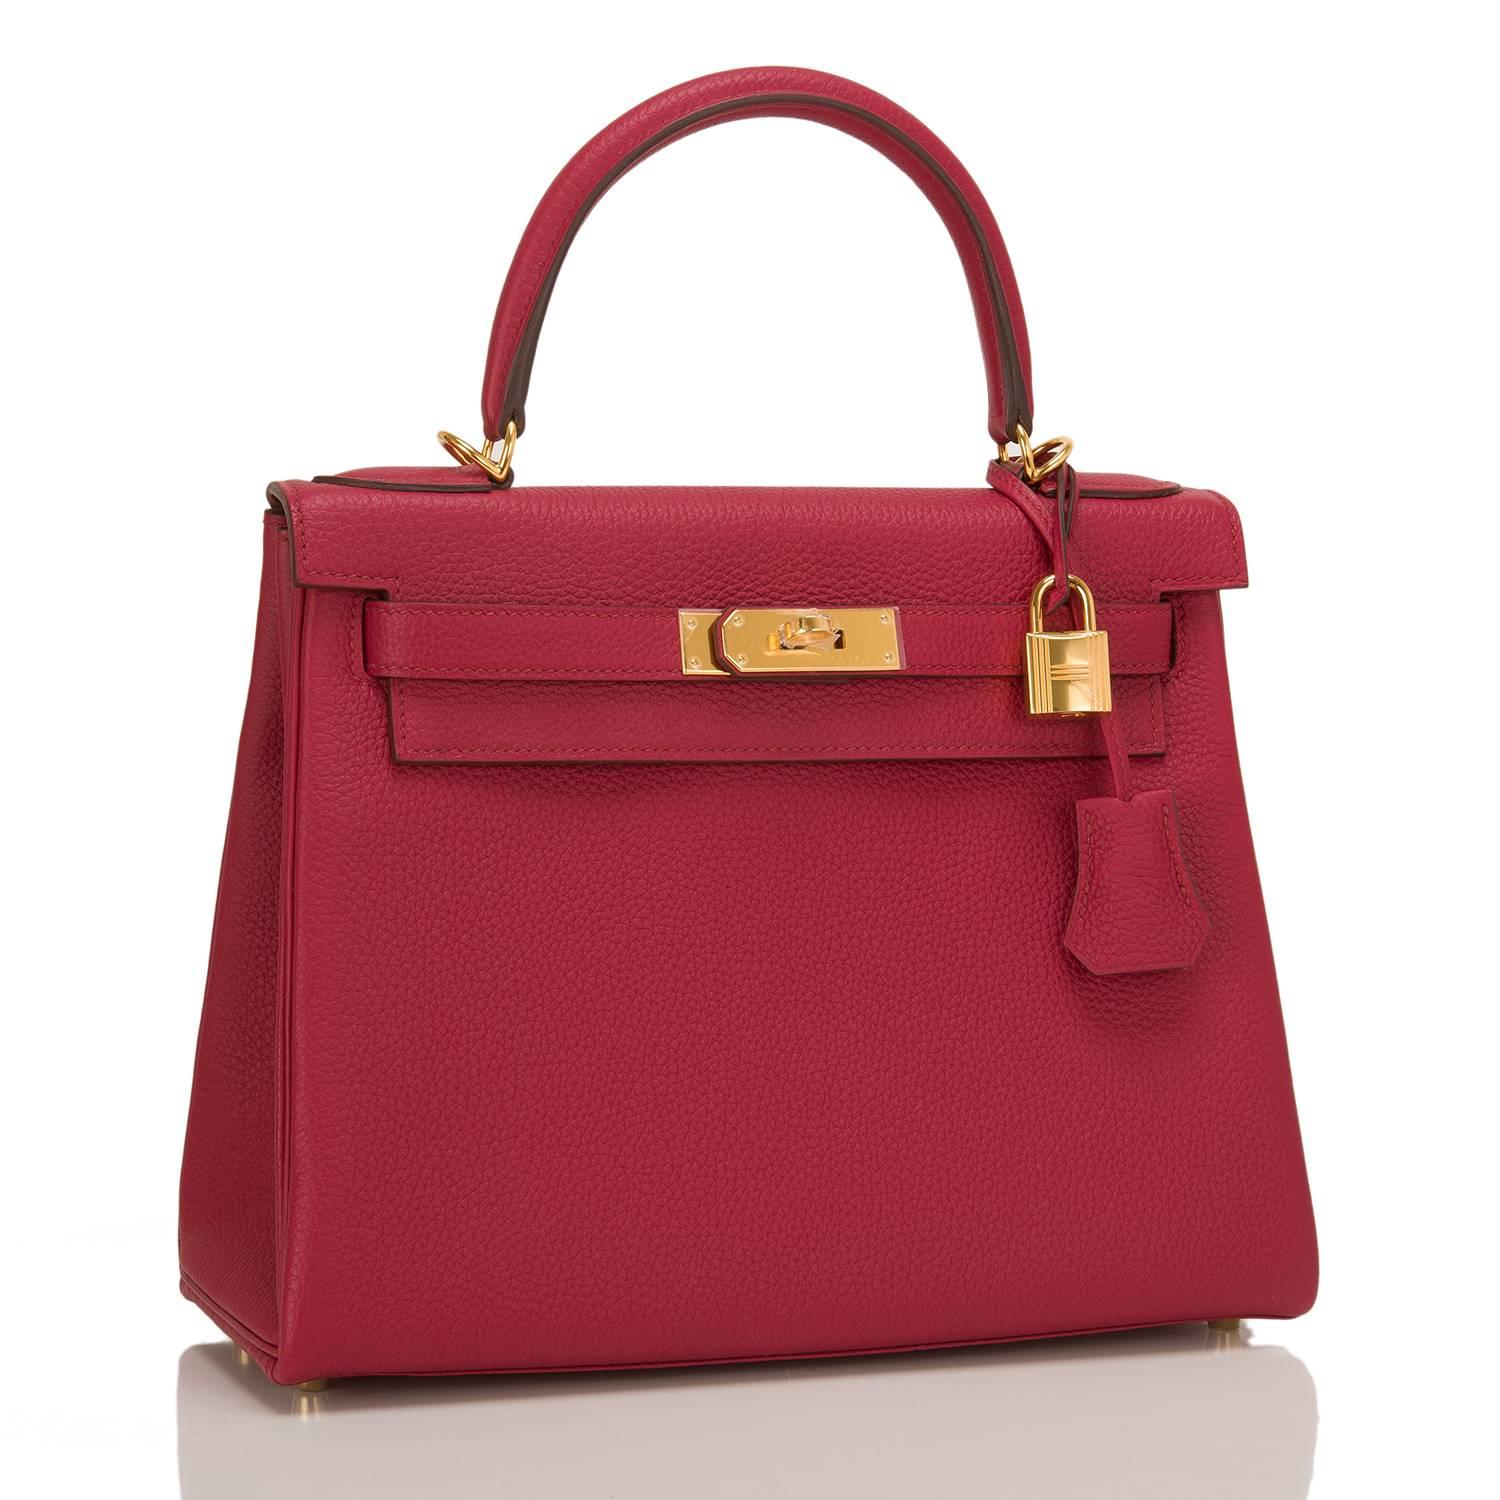 Hermes Rubis Kelly 28cm in togo leather with gold hardware.

The bag in the Retourne style features tonal stitching, front toggle closure, clochette with lock and two keys, single rolled handle and optional shoulder strap.

The Interior is lined